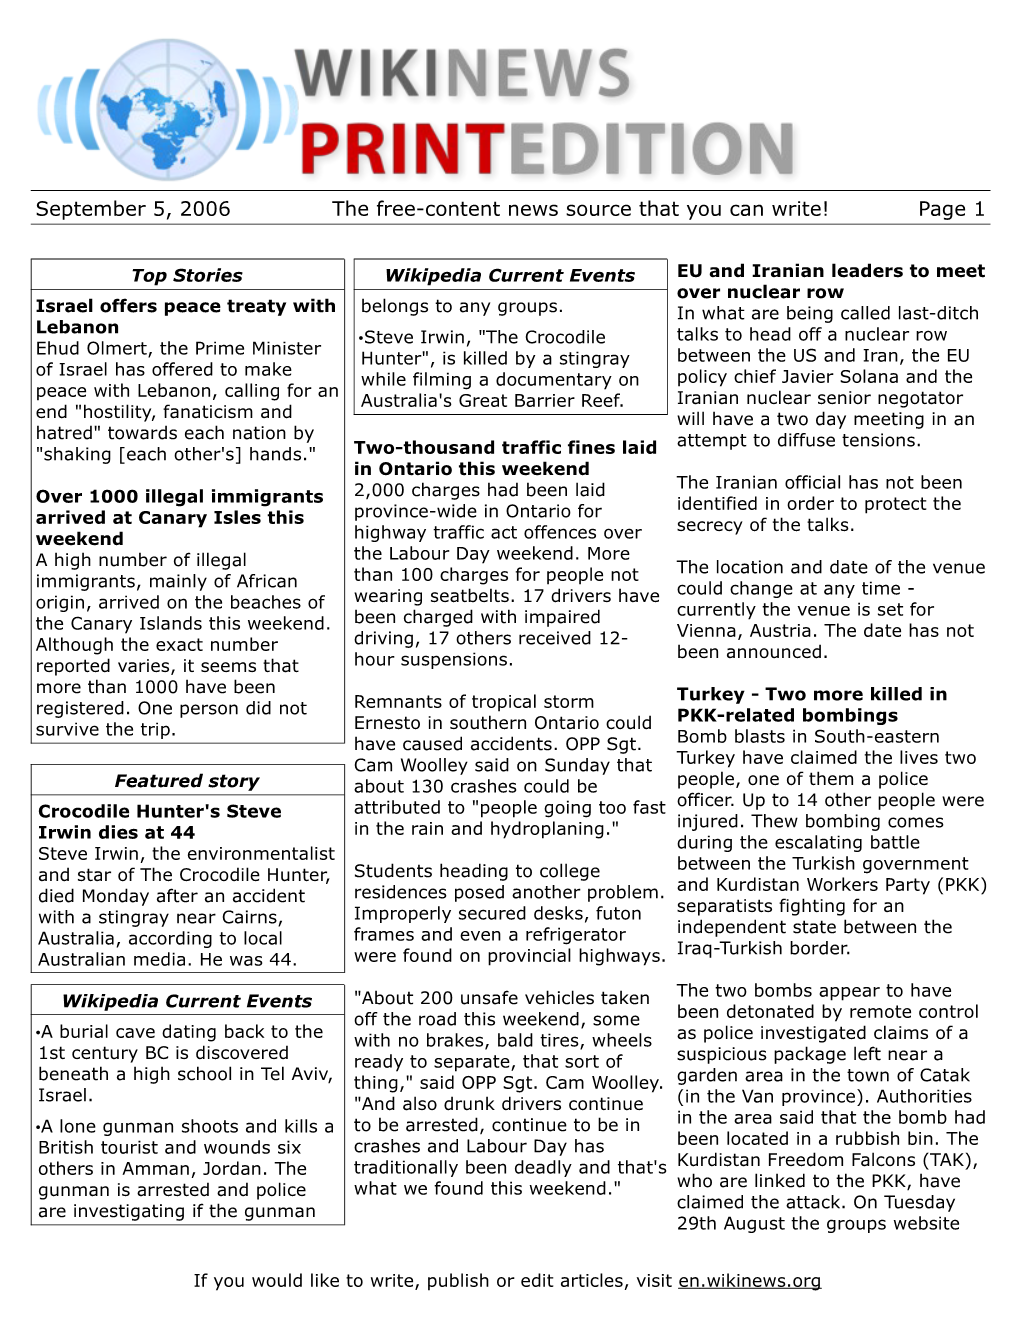 September 5, 2006 the Free-Content News Source That You Can Write! Page 1